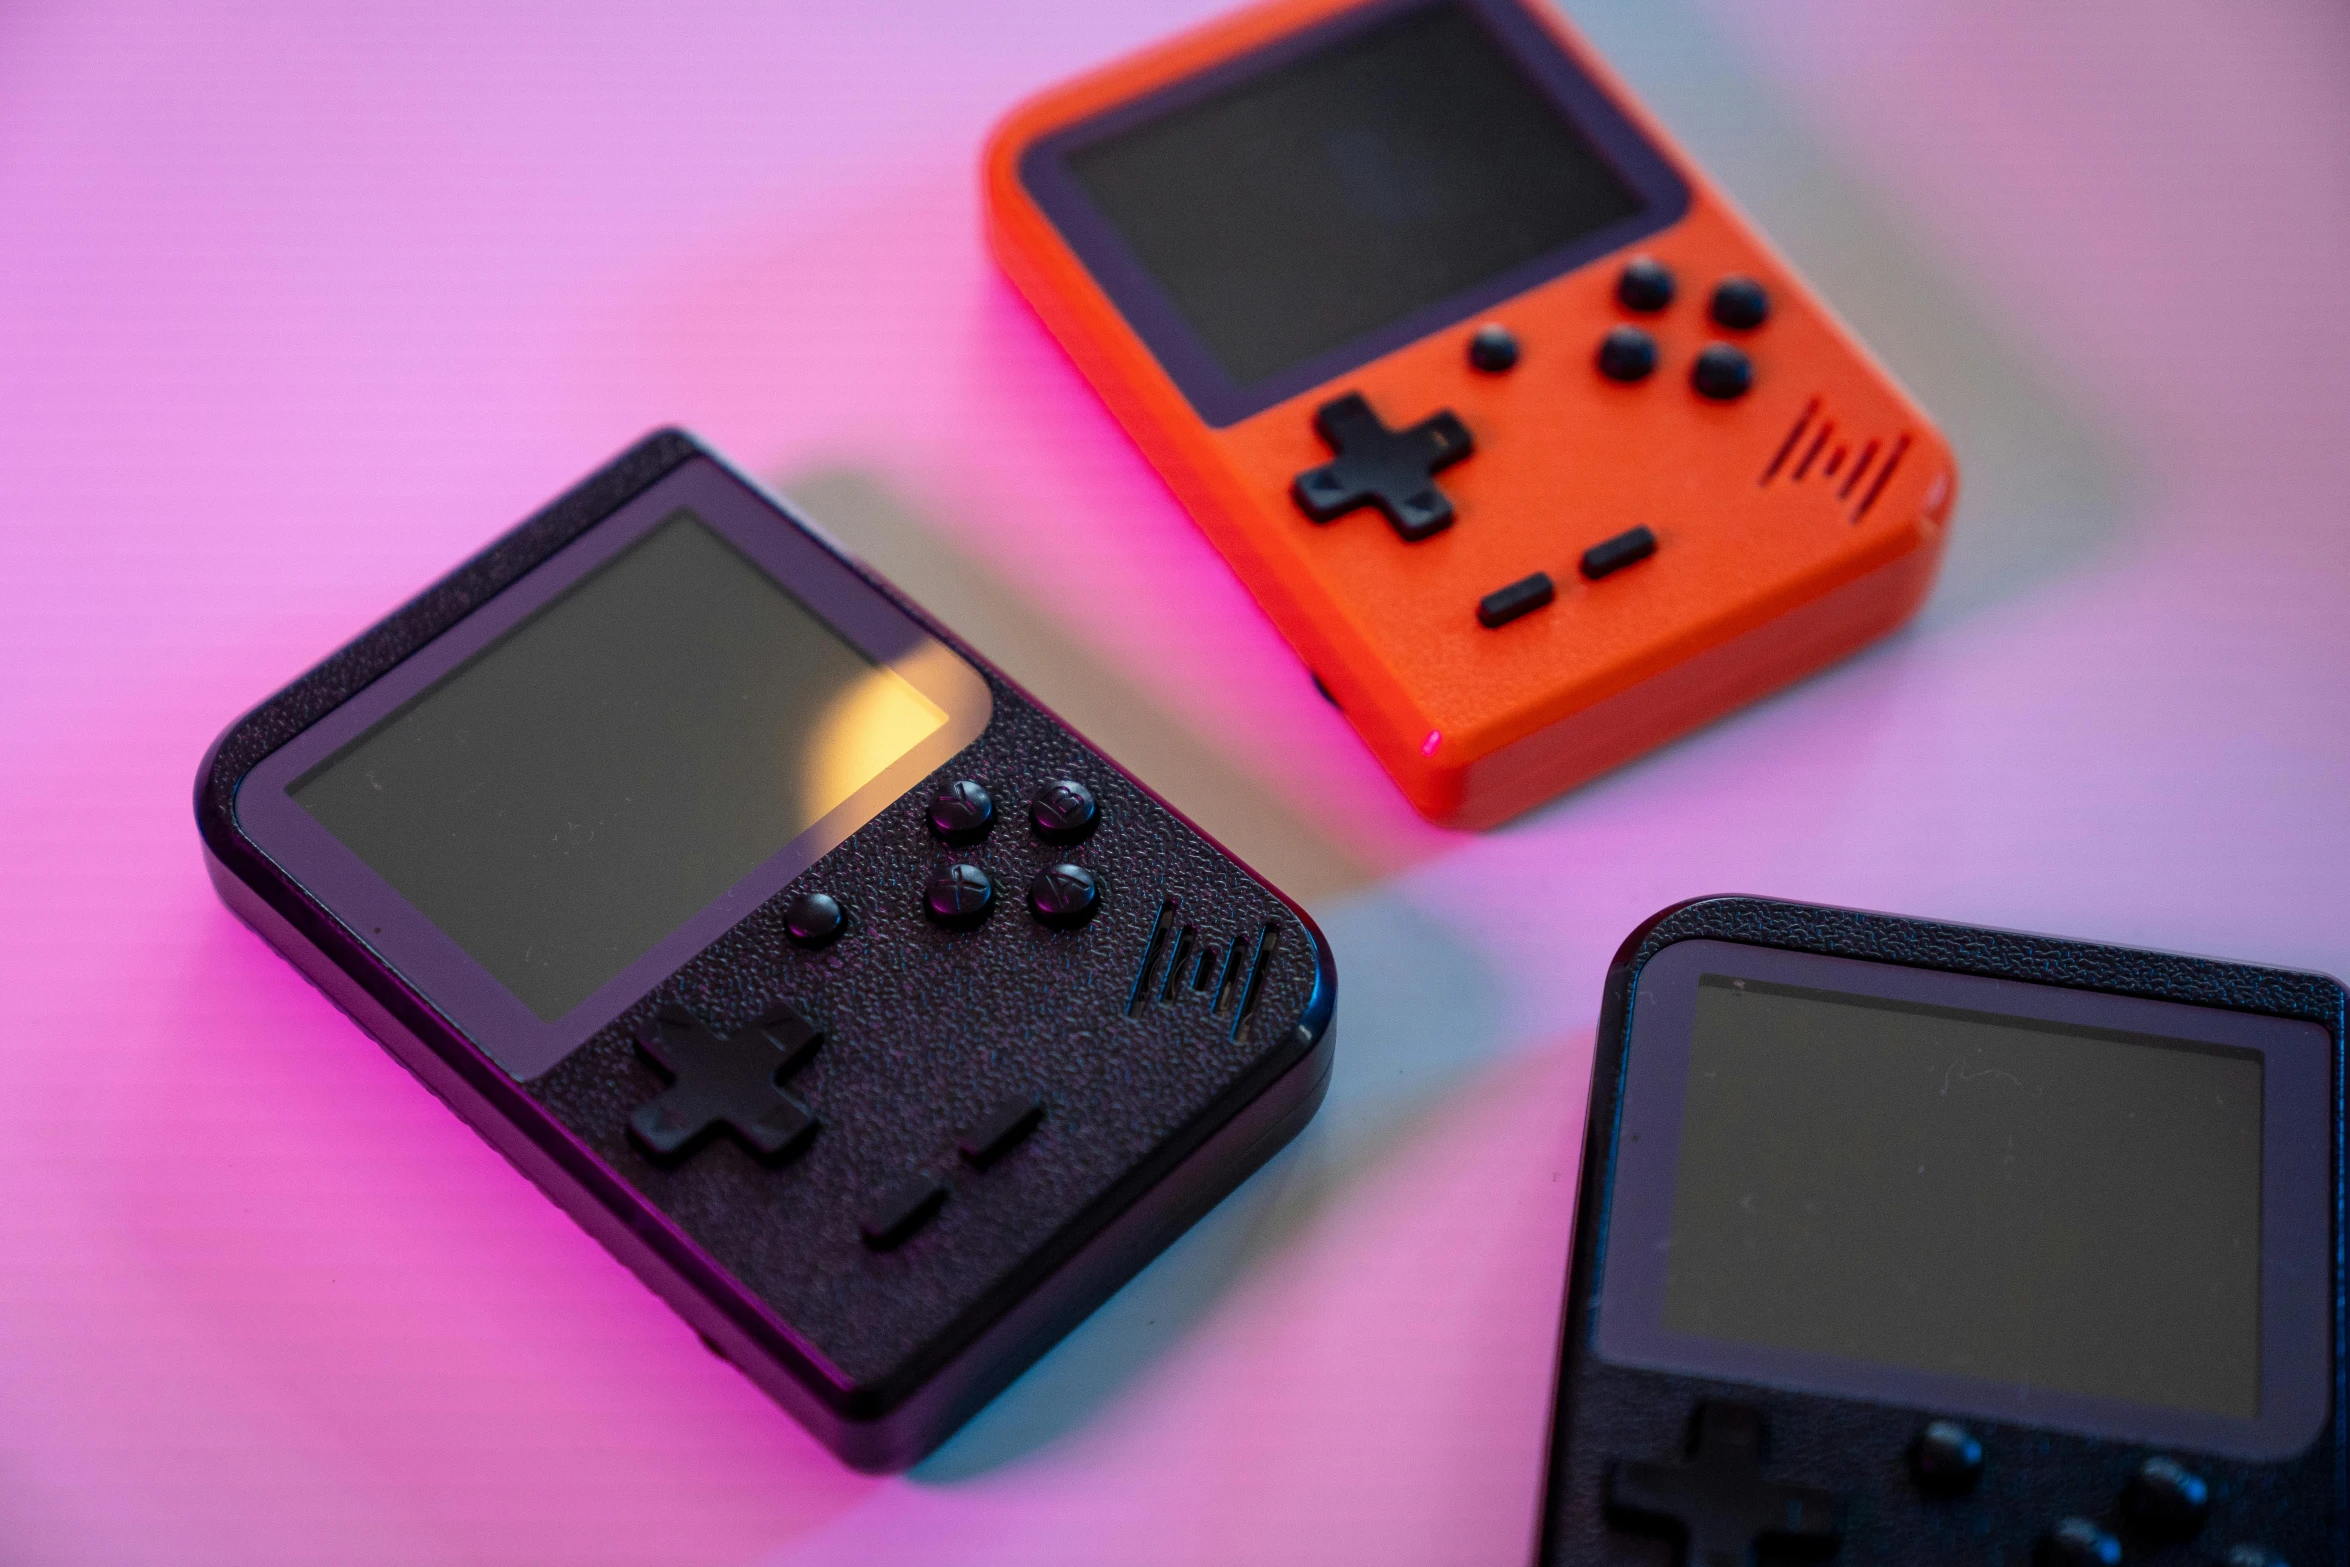 a couple of small game consoles sitting on top of a table, 3 d print, superpop ultrabright, 33mm photo, handheld